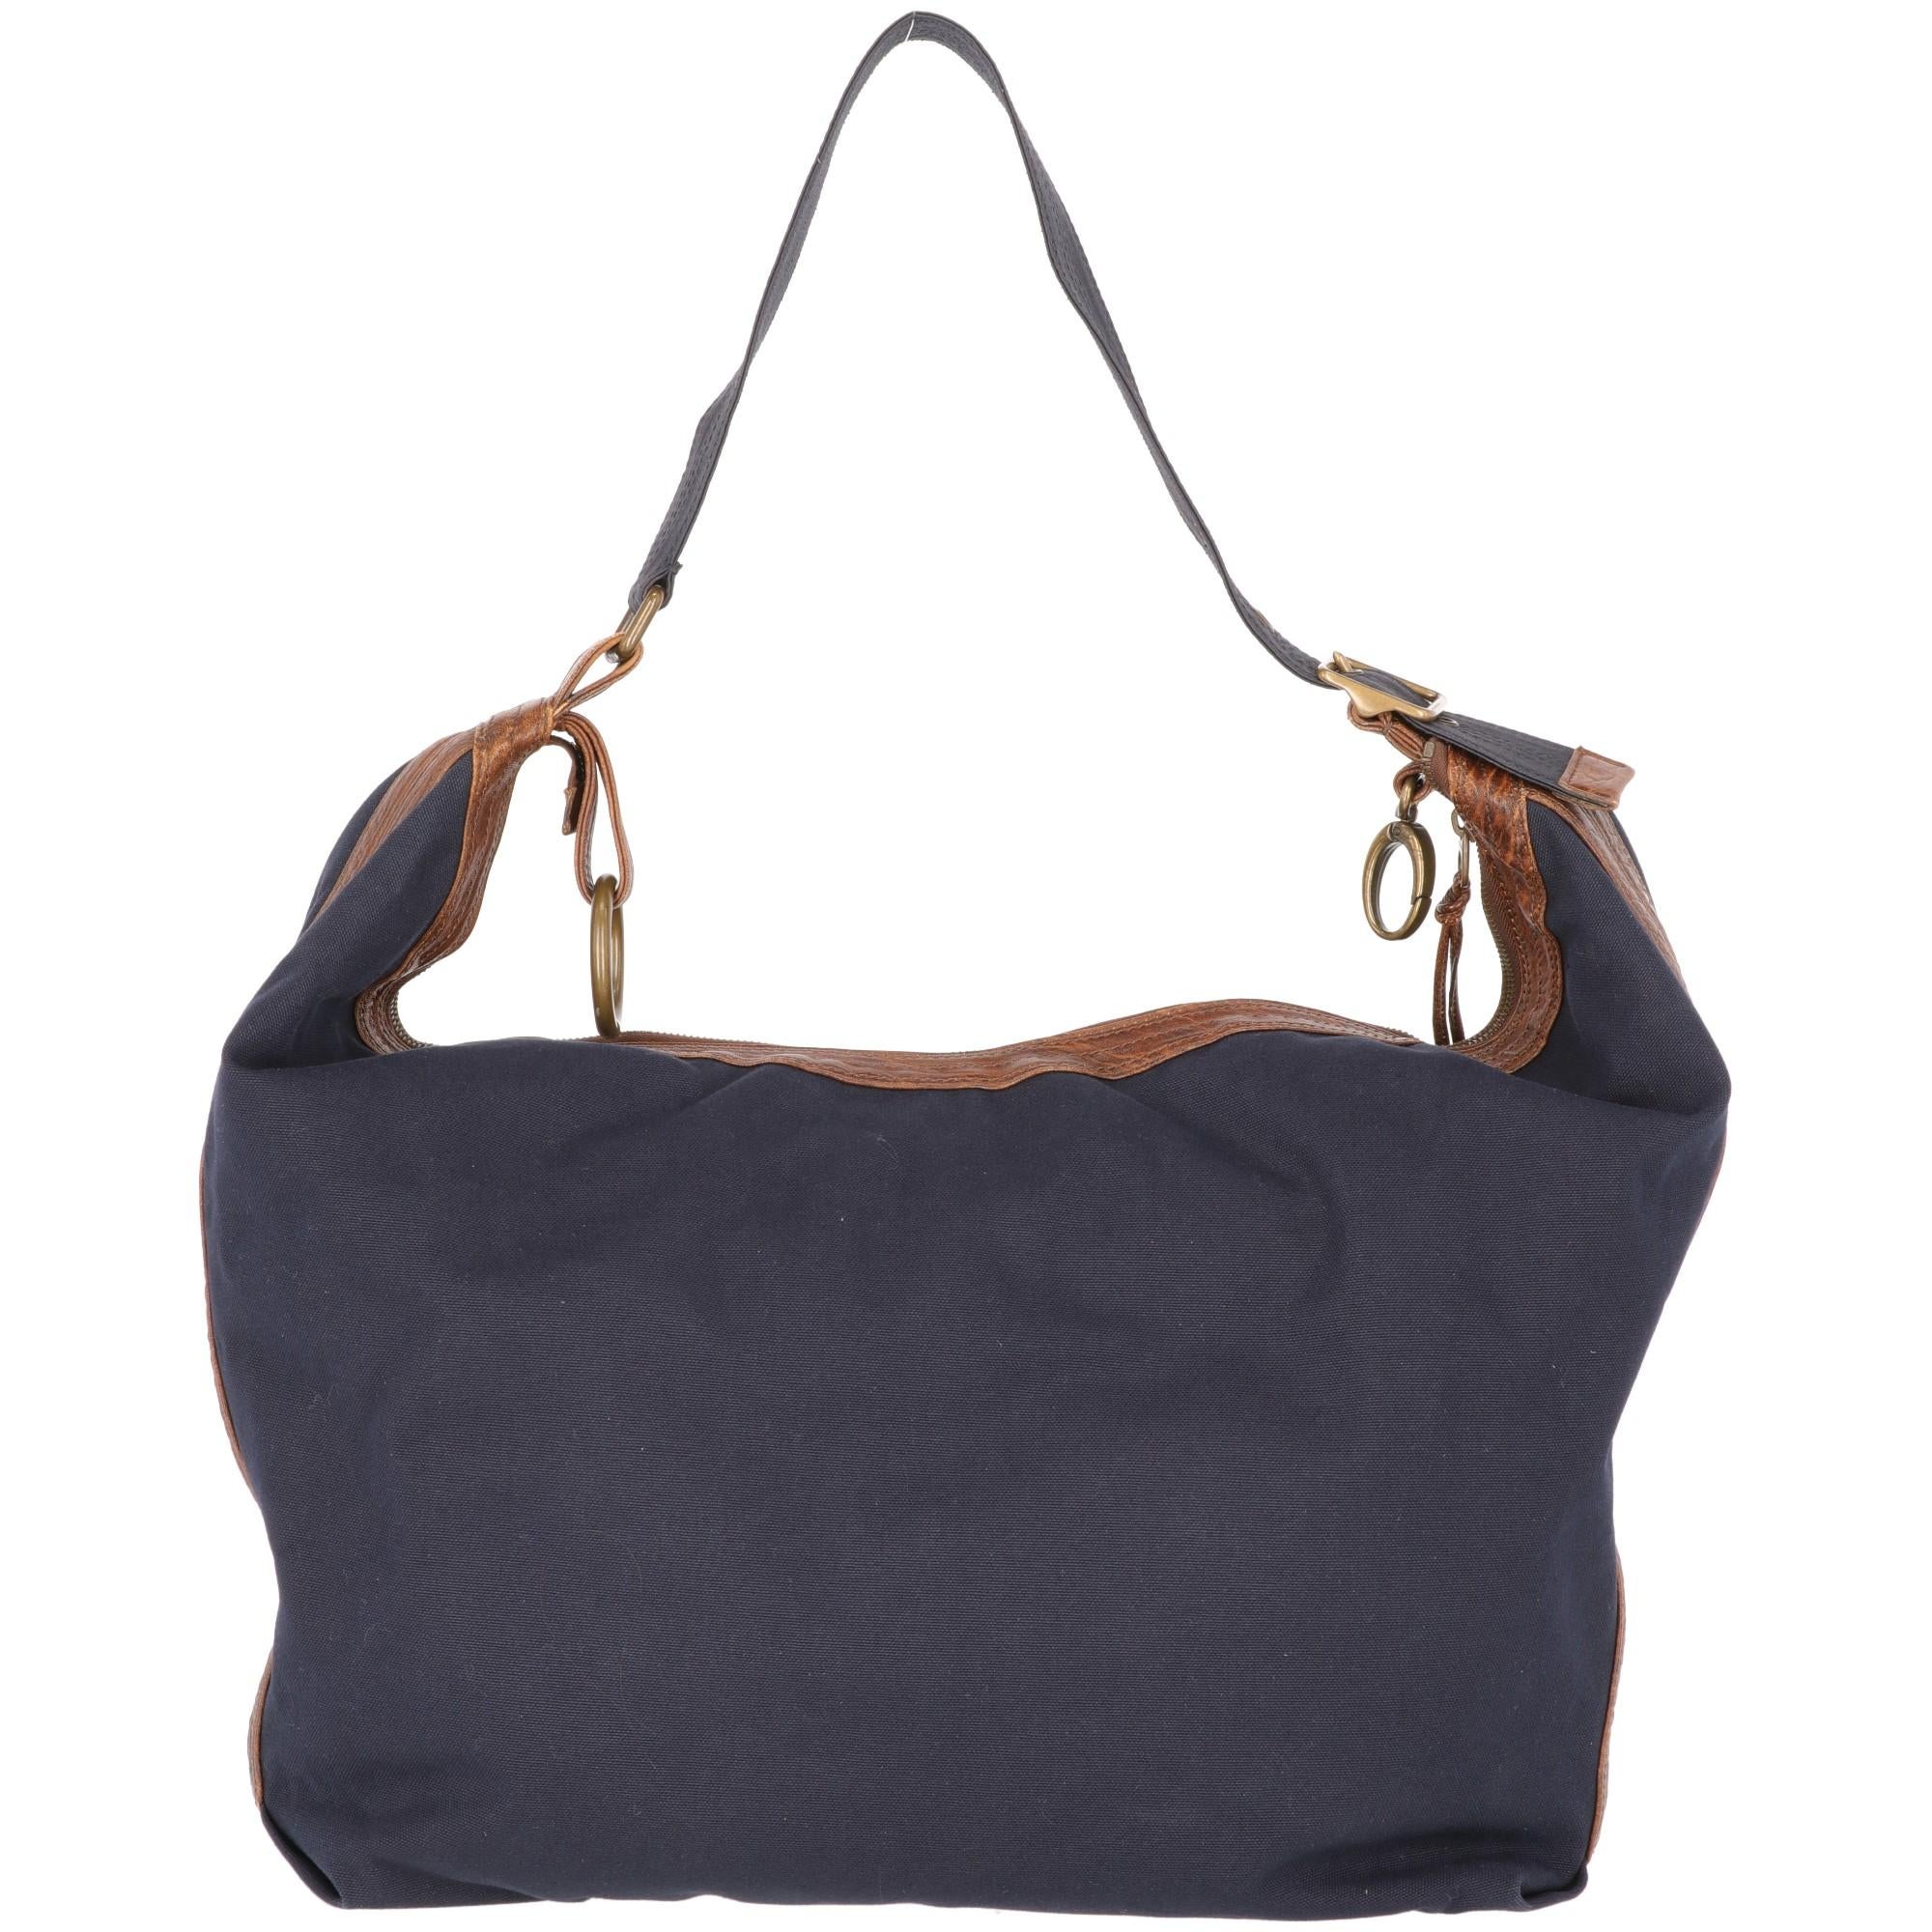 Women's 2000s Marni Blue Cotton Tote Bag with Brown leather details